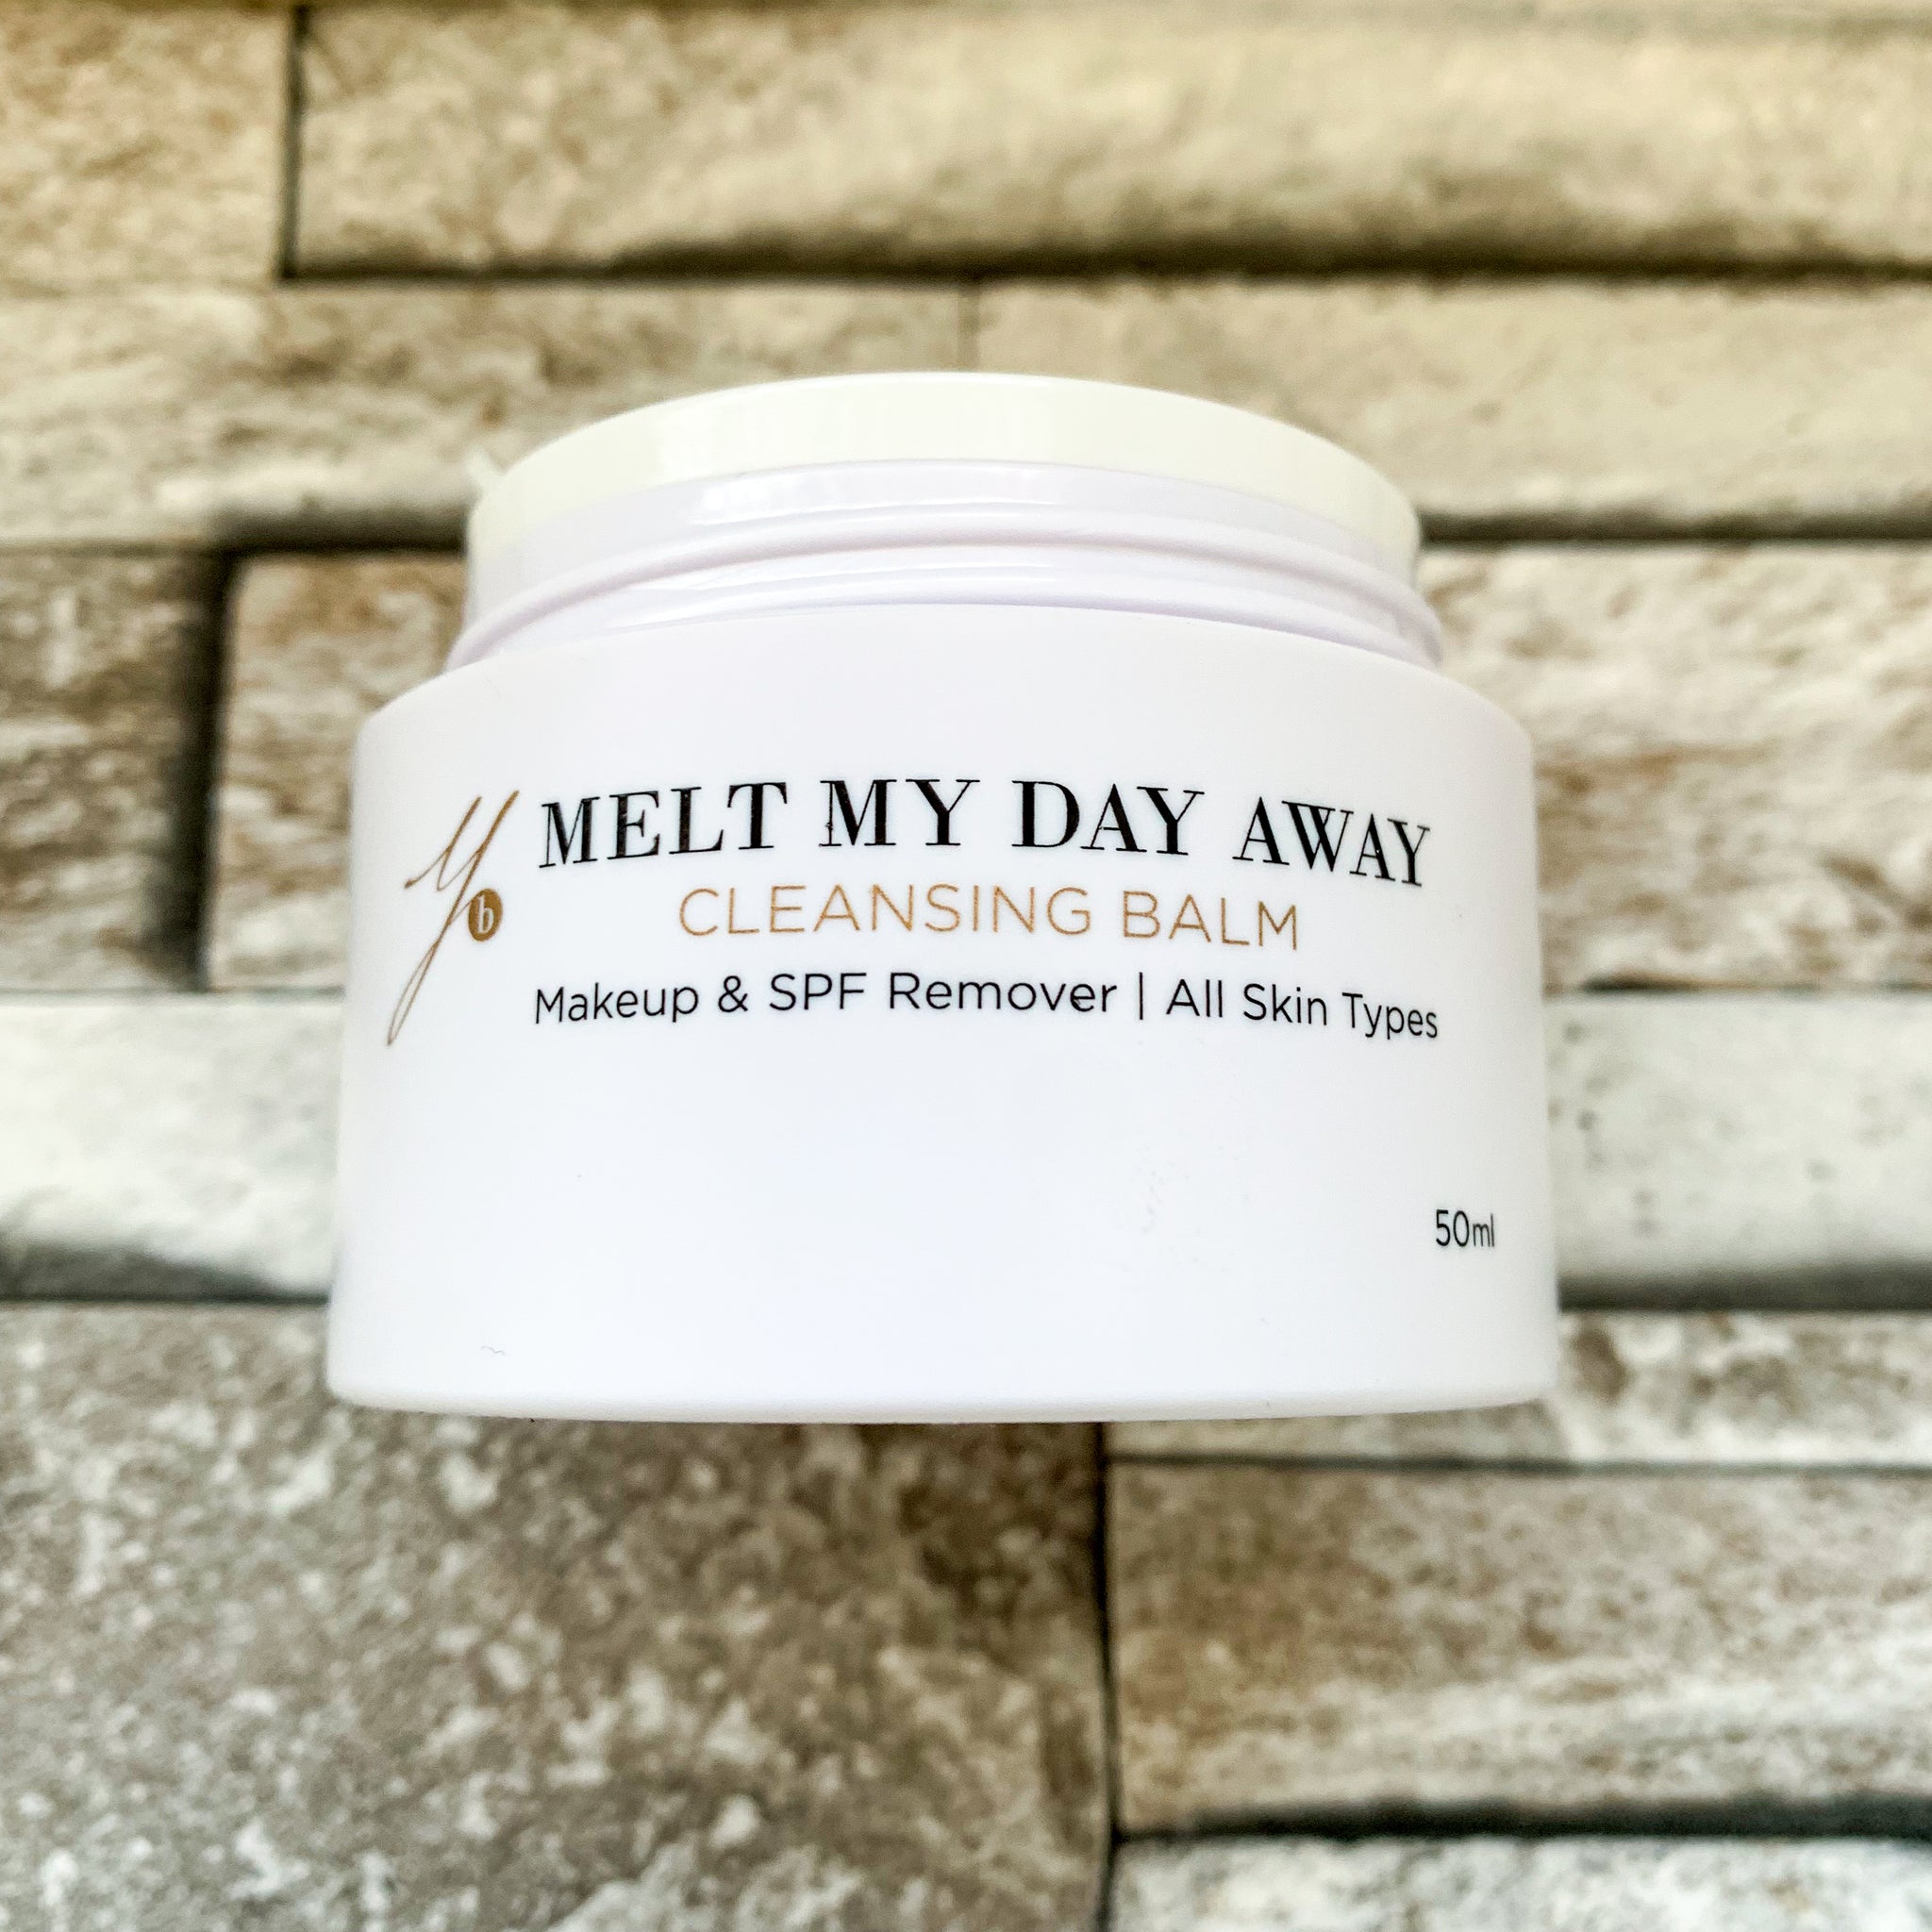 MELT MY DAY AWAY Cleansing Balm